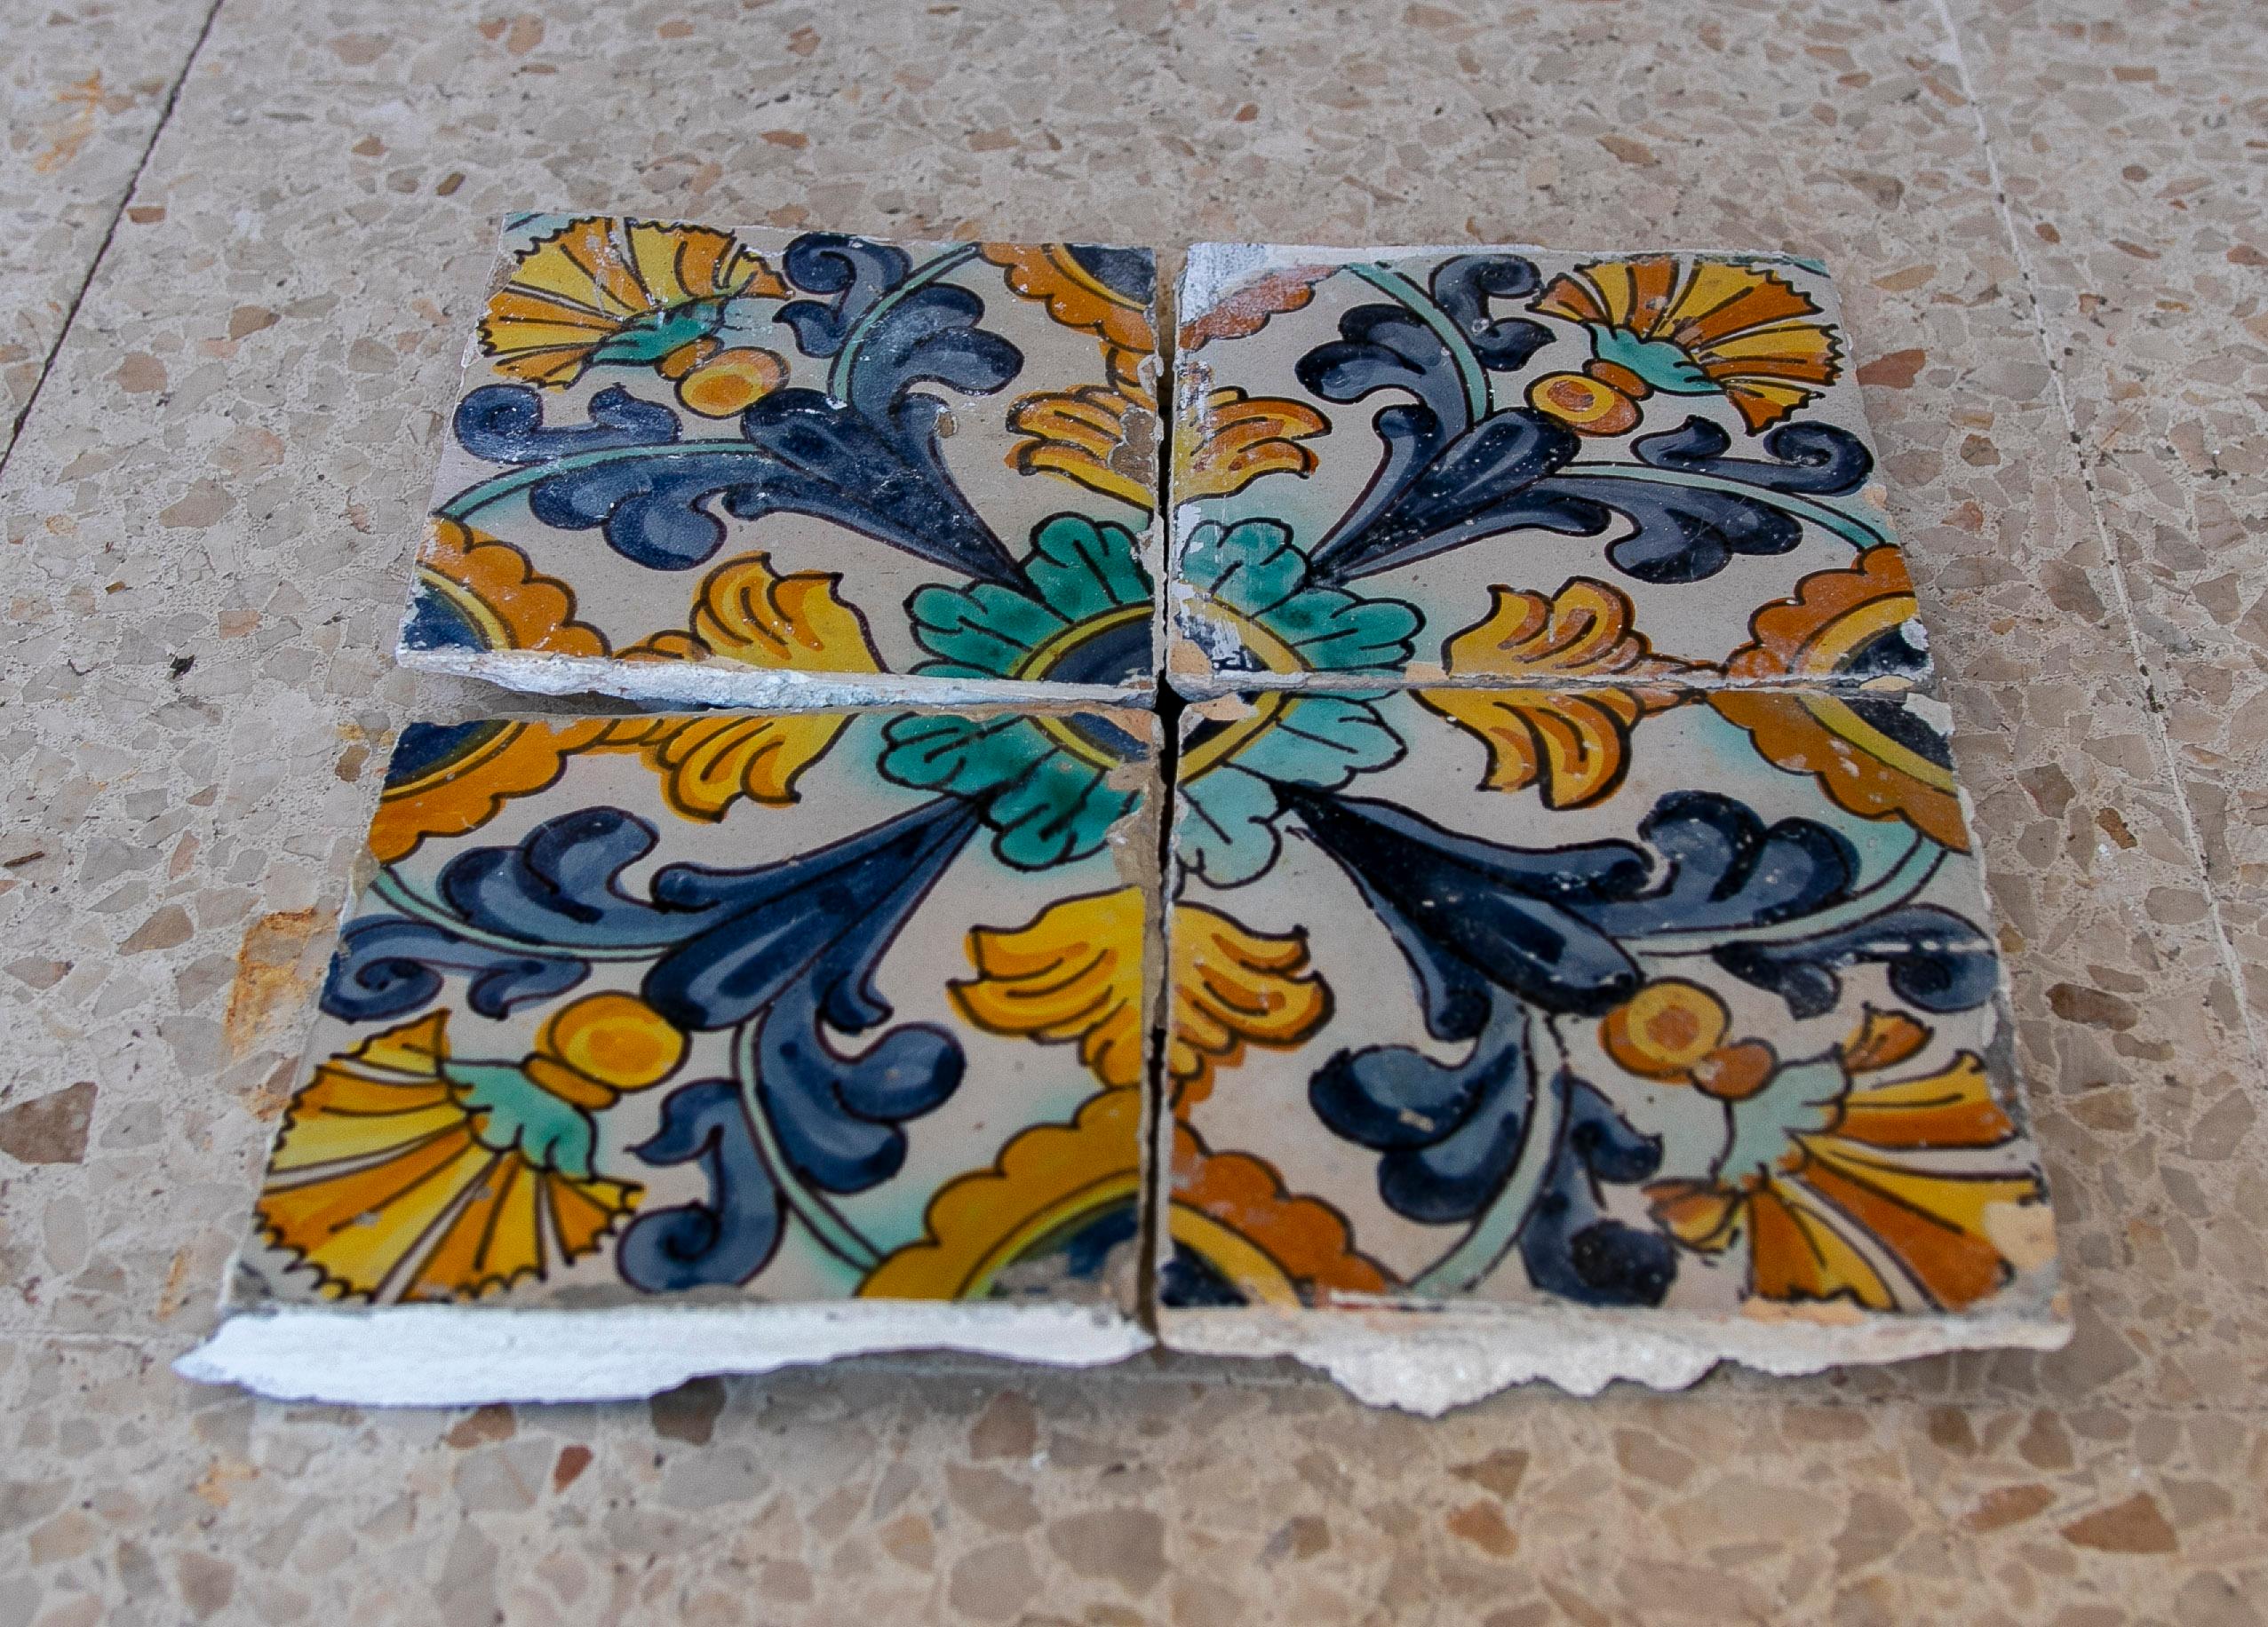 Set of 4 Mid-19th Century Spanish Hand Painted Patterned Glazed Ceramic Tiles 1